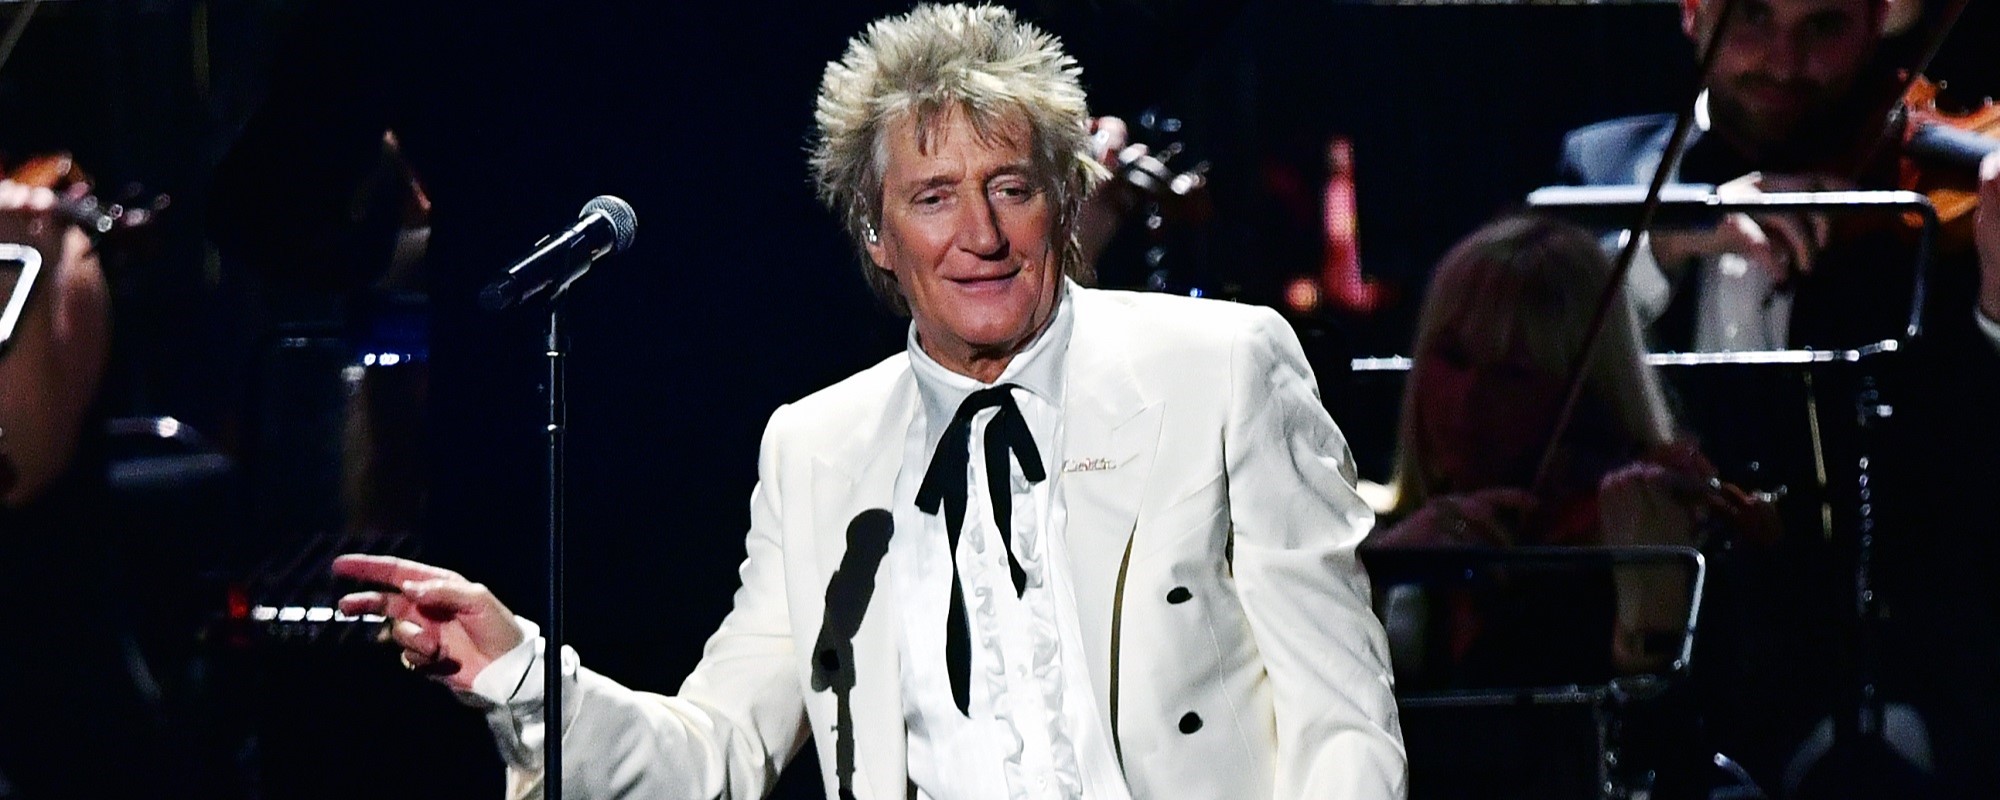 Rod Stewart Says His Raspy Singing Voice May Be Due to a Broken Nose: “It’s Just a Big Accident”